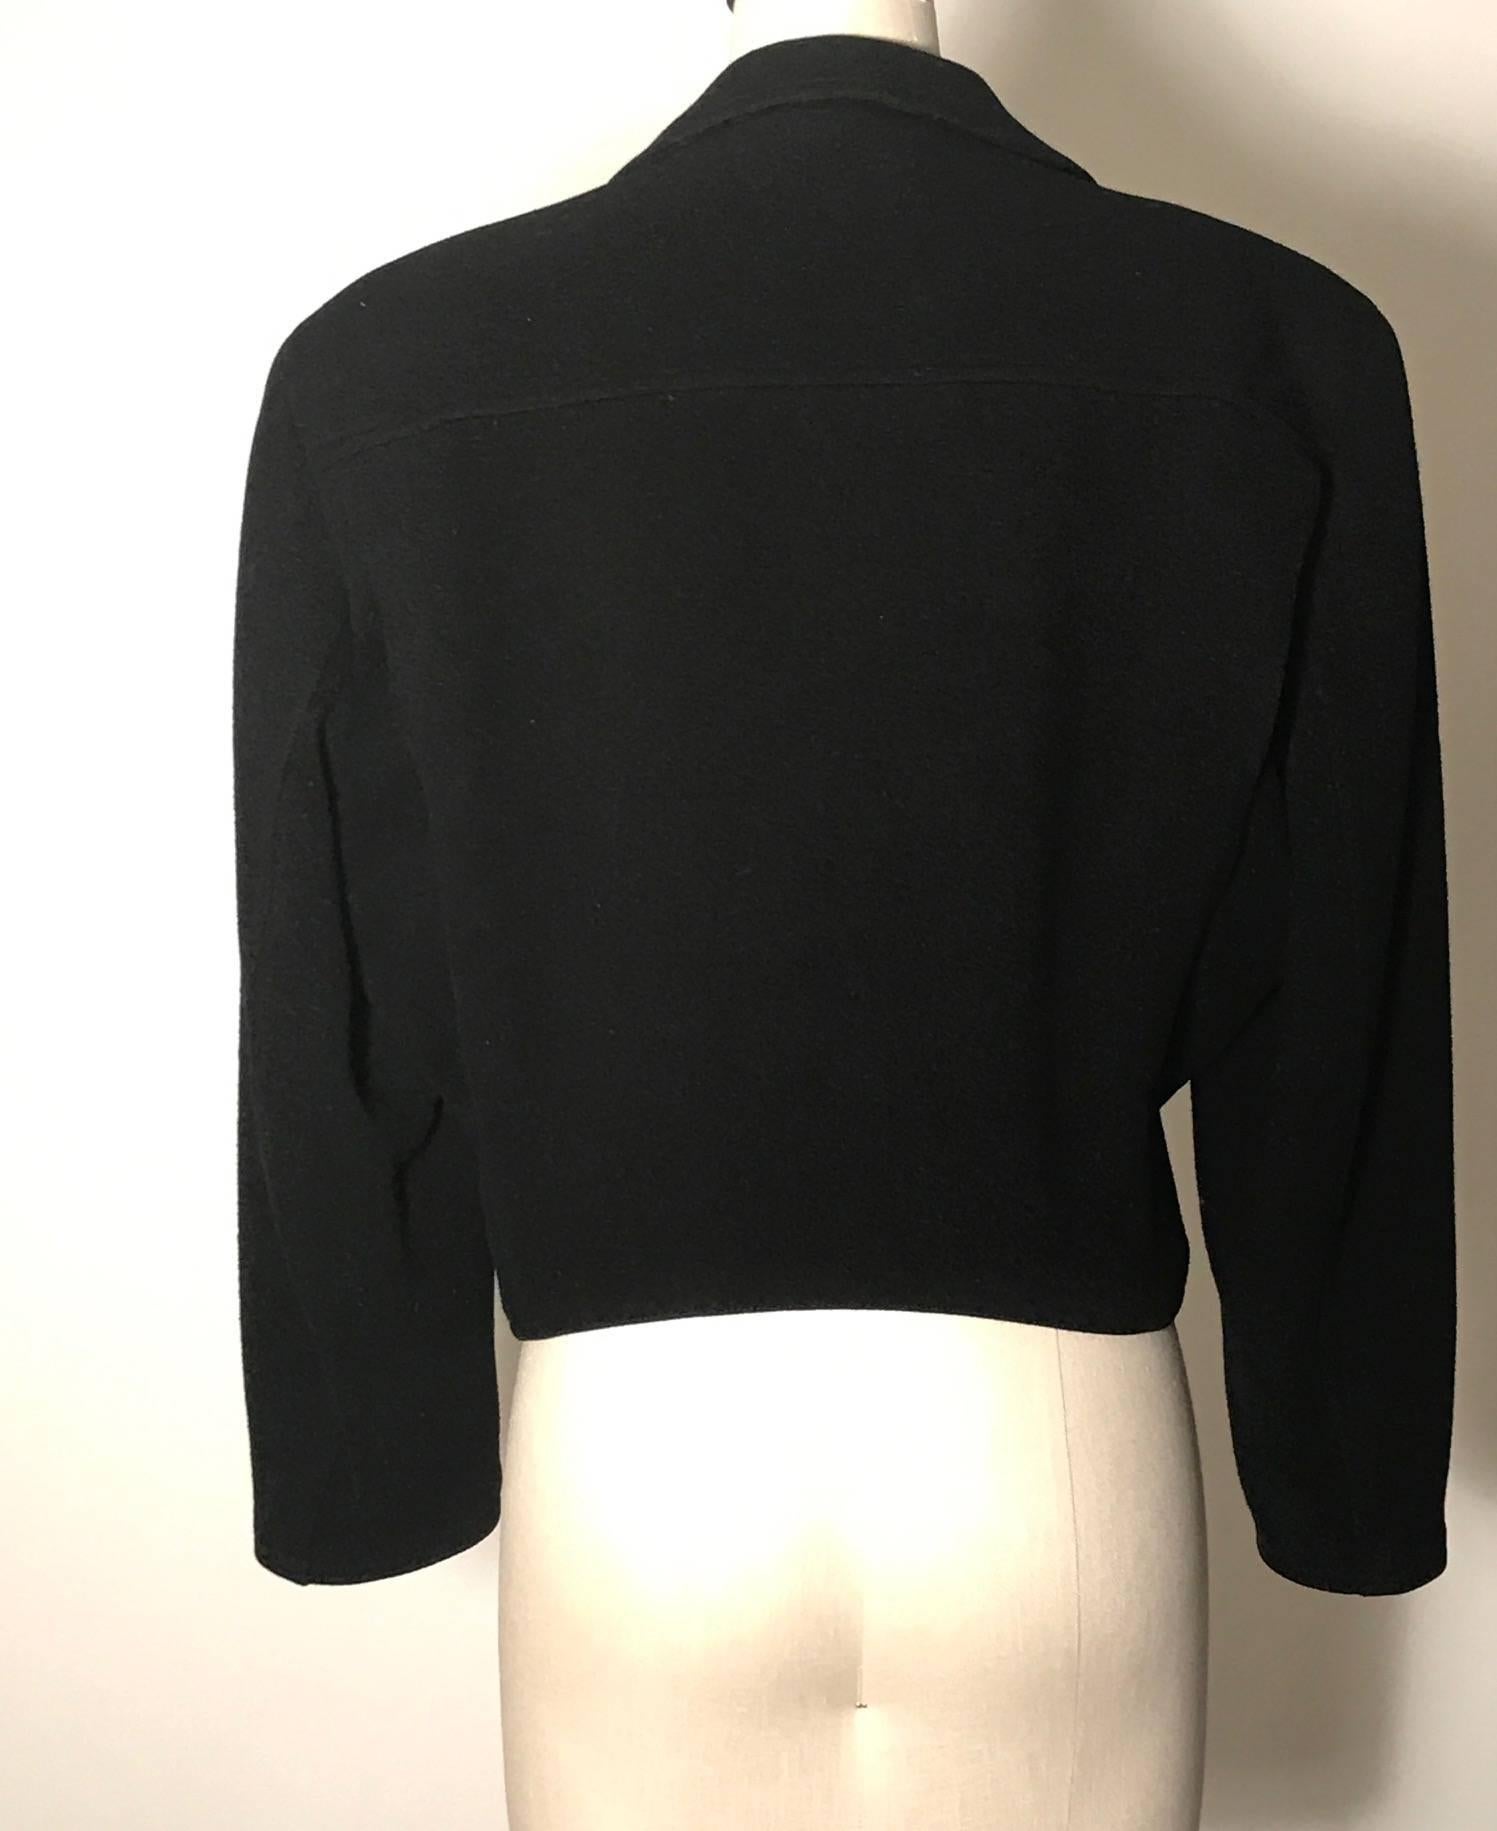 Sprouse by Stephen Sprouse Black Wool Biker Jacket with Zipper Pockets ...